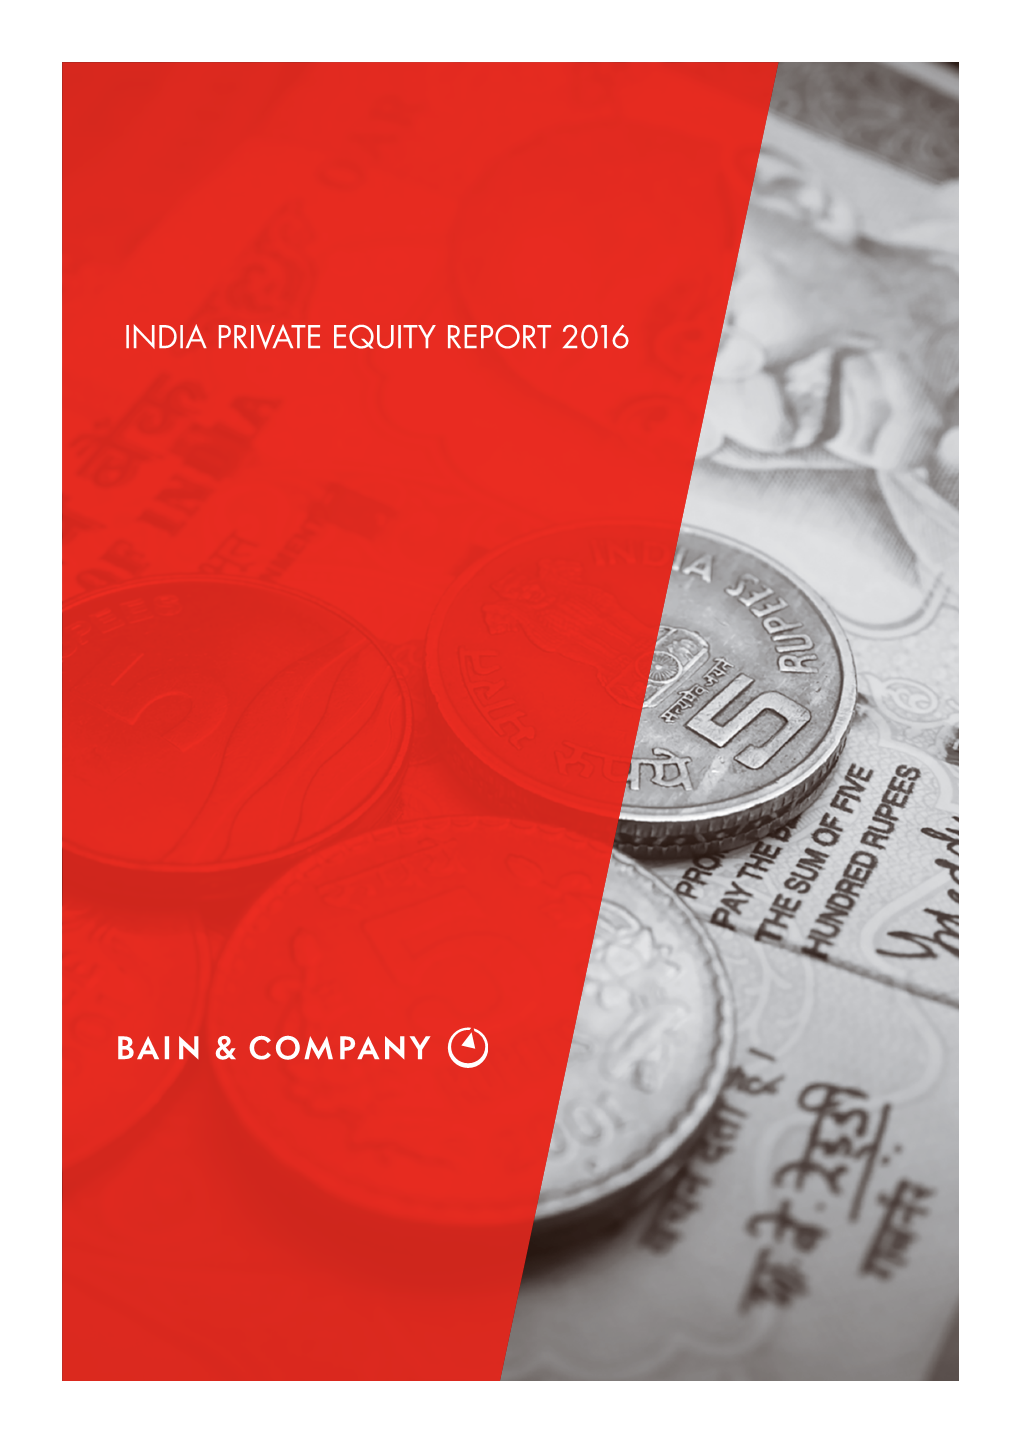 India Private Equity Report 2016